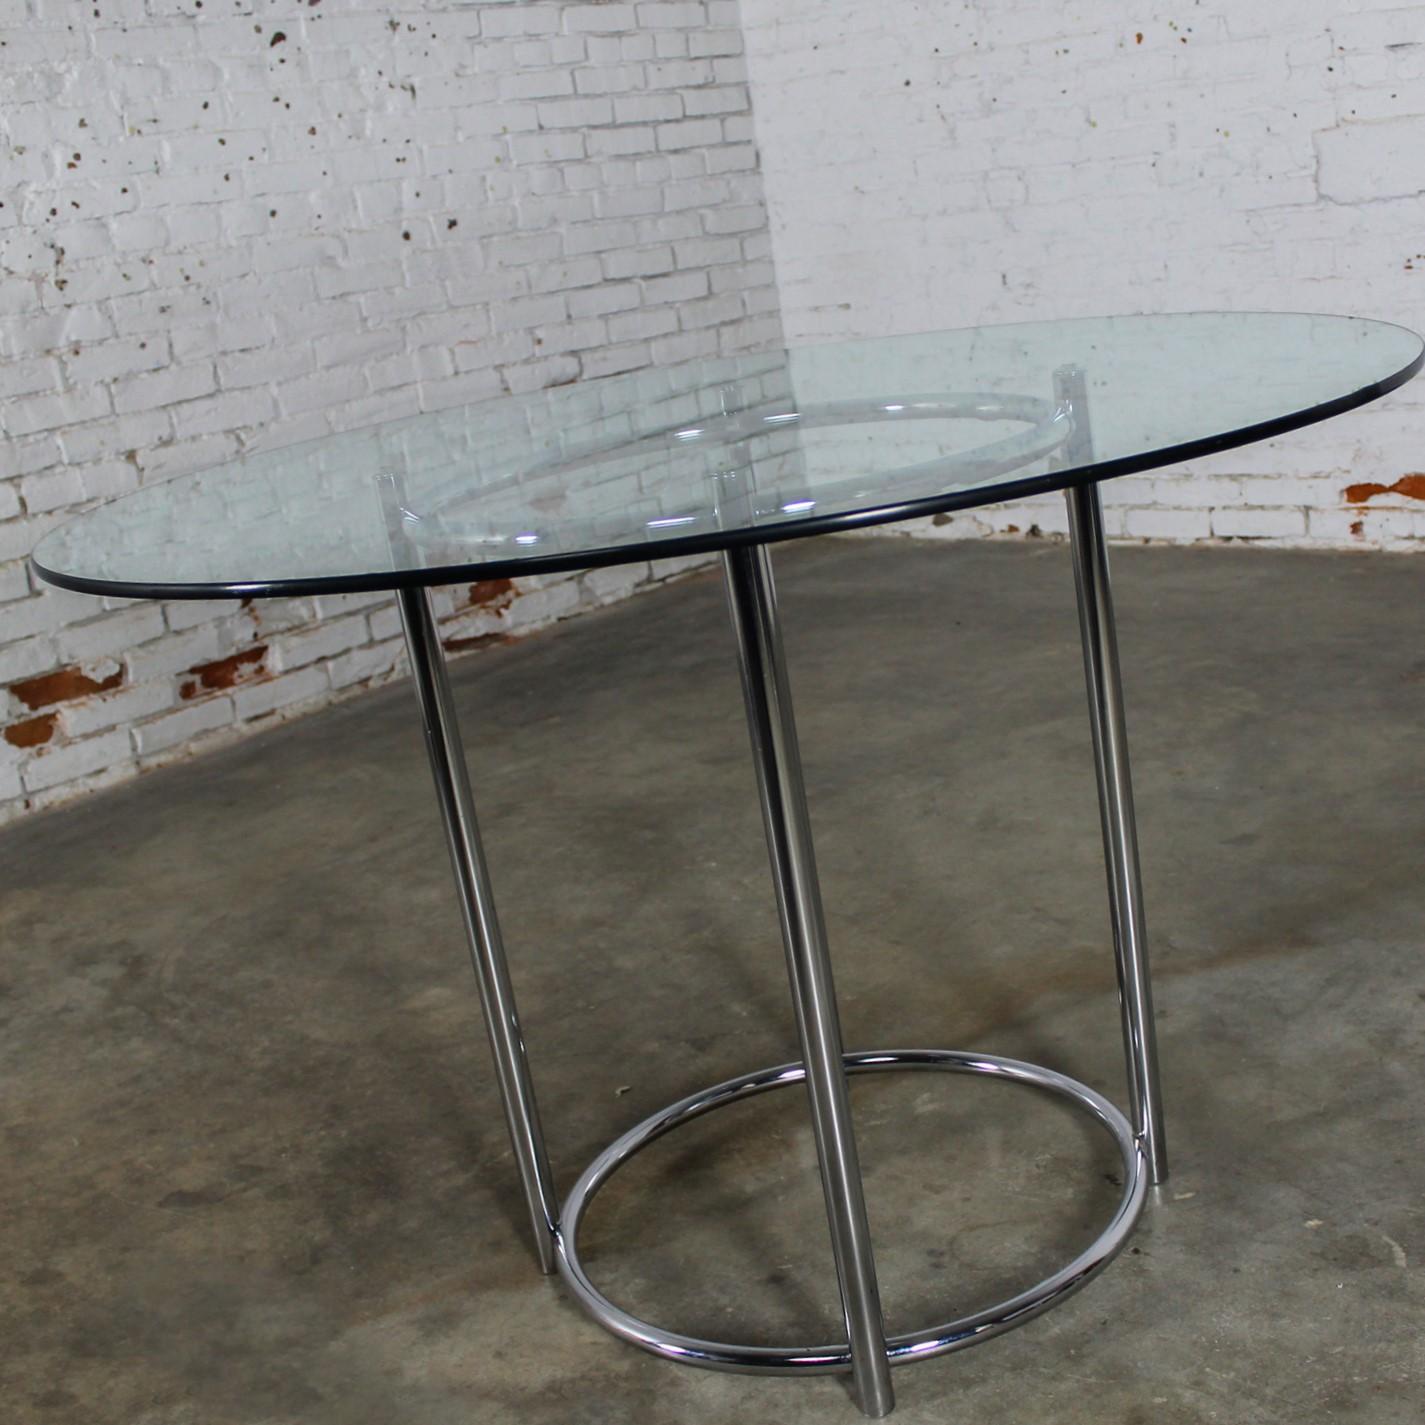 American 1980’s Modern Daystrom Dinette or Dining Table Chrome Frame & Round Glass Top